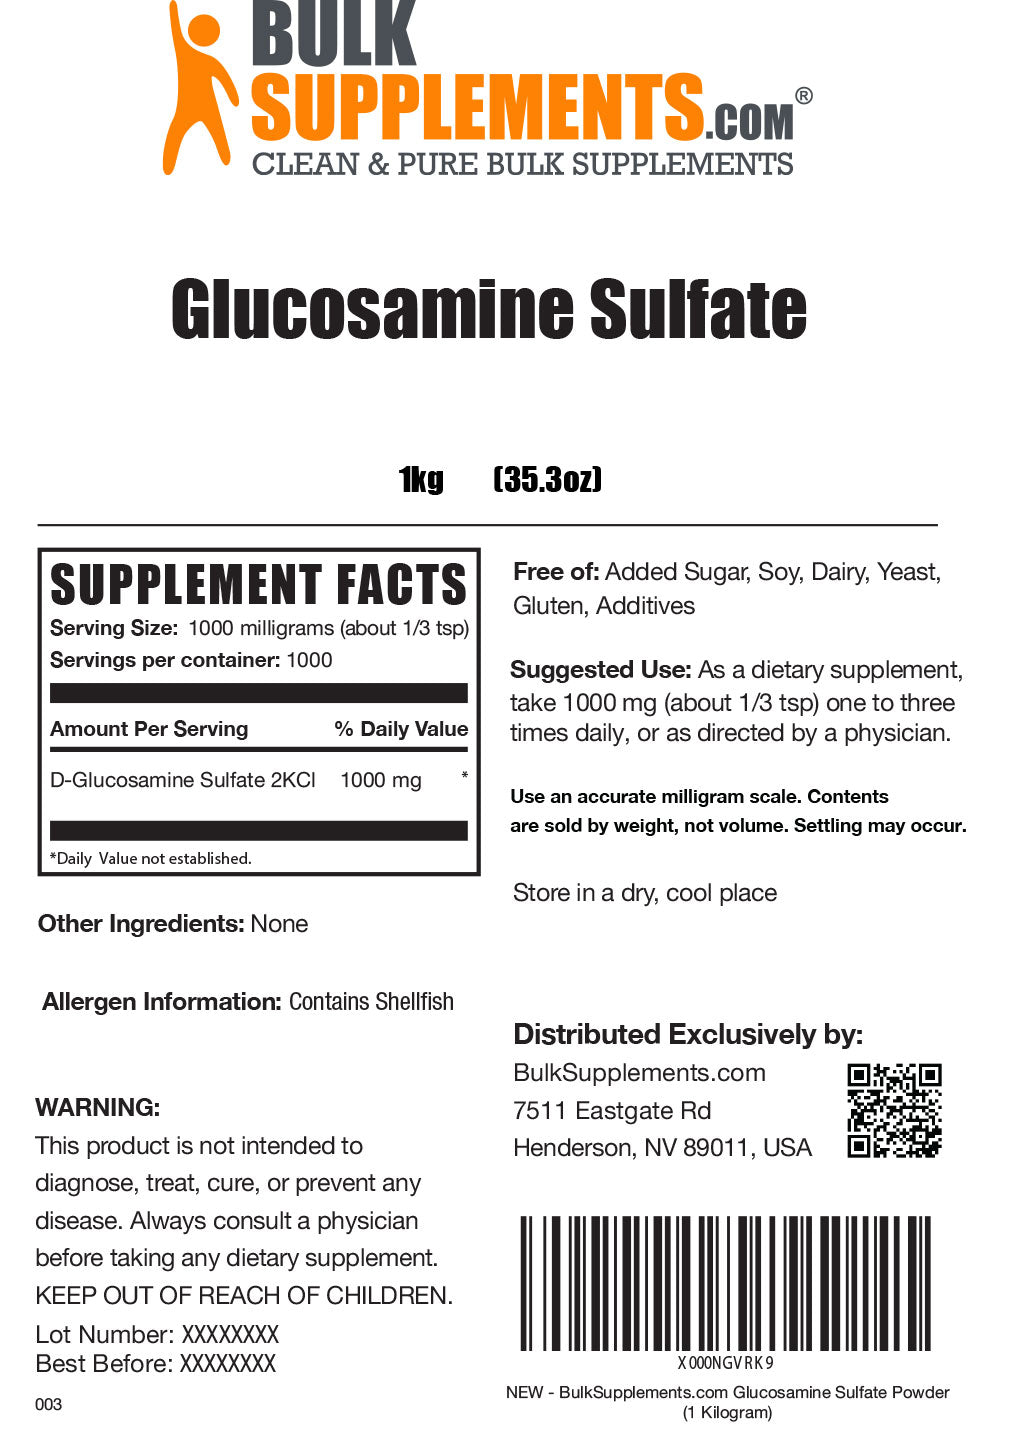 Glucosamine Sulfate supplement facts 1kg